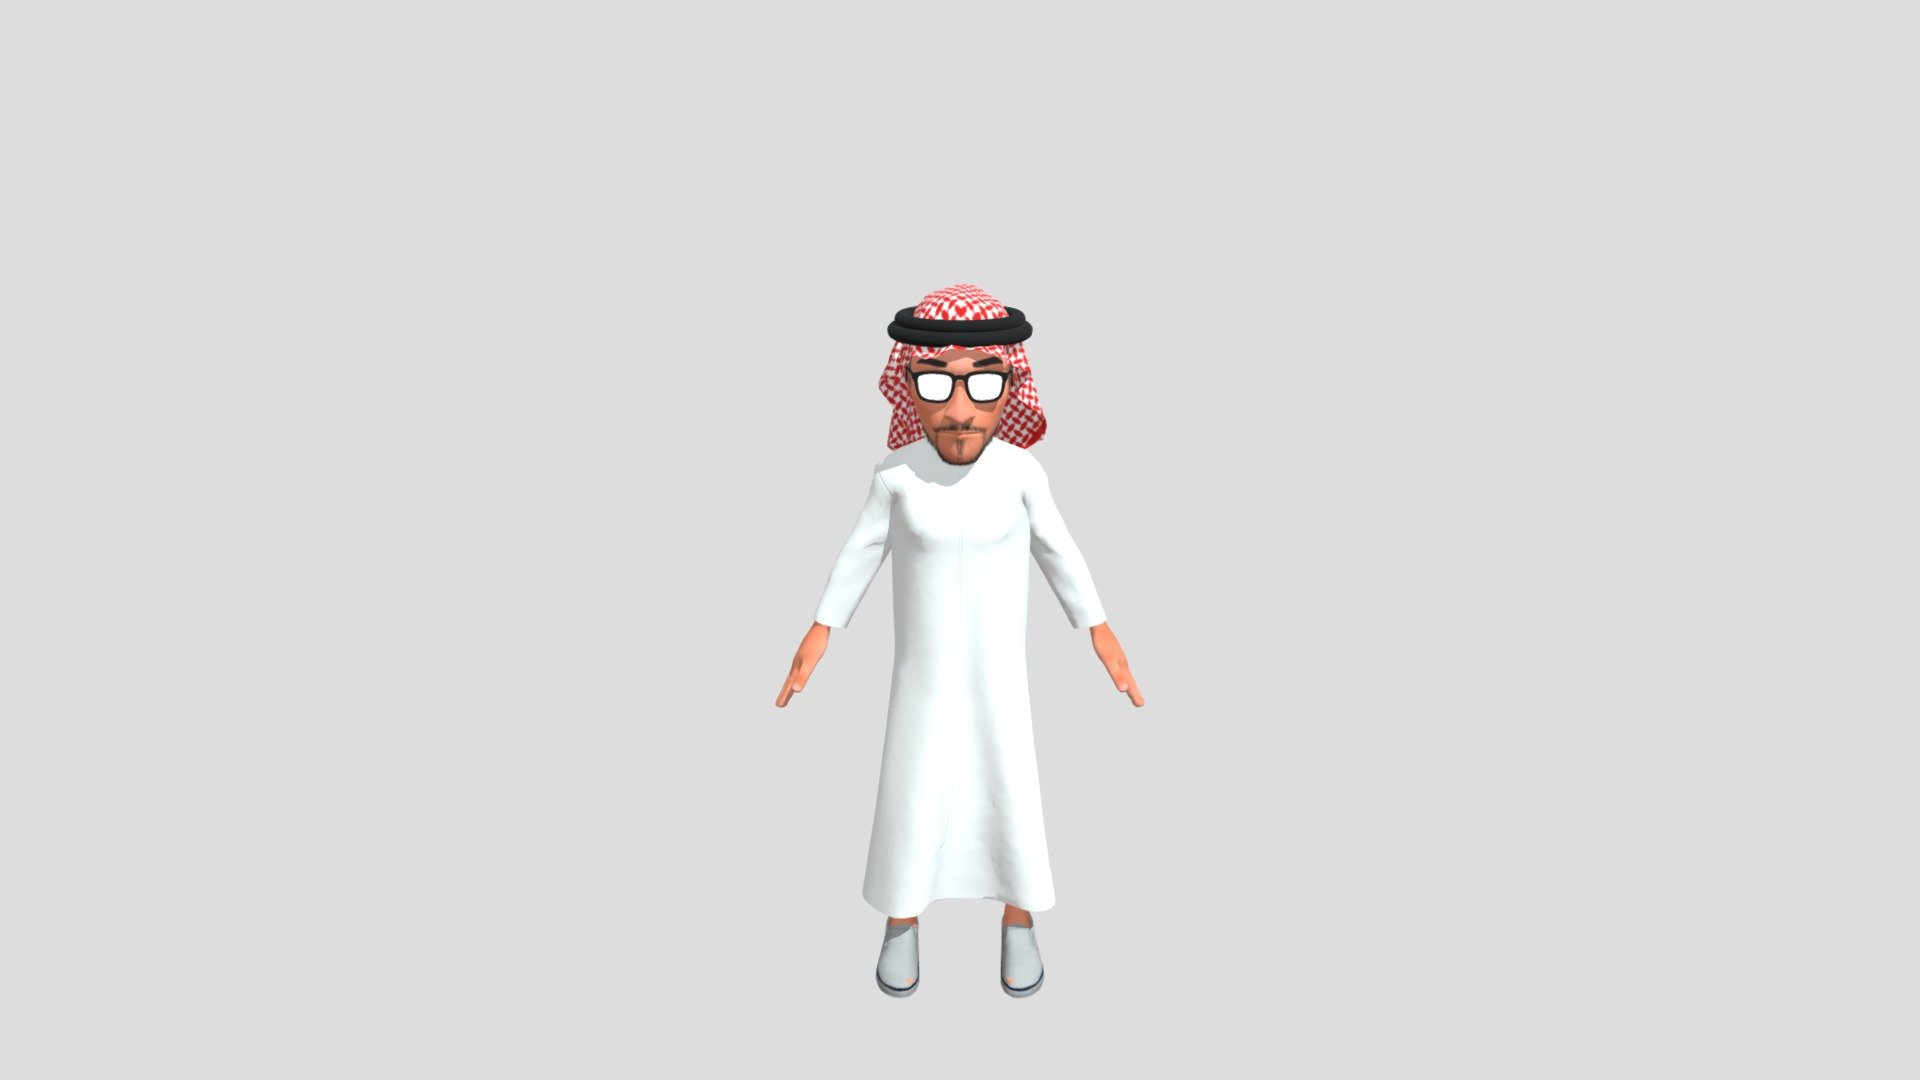 Description Arabic Character in Disney / Pixar Style made in Cinema 4d R26 Light setup in Arnold Renderer. Ready for your Personal Websites, Movies, TV, advertising, etc.

File Formats: Cinema 4d .c4d extension Fbx Version Blender .blend extension Maya .mb extension

Rig It includes a fully bone rigged character including fingers and head rig. The facial rig has also been done through pose morphs and weight blends 3d model